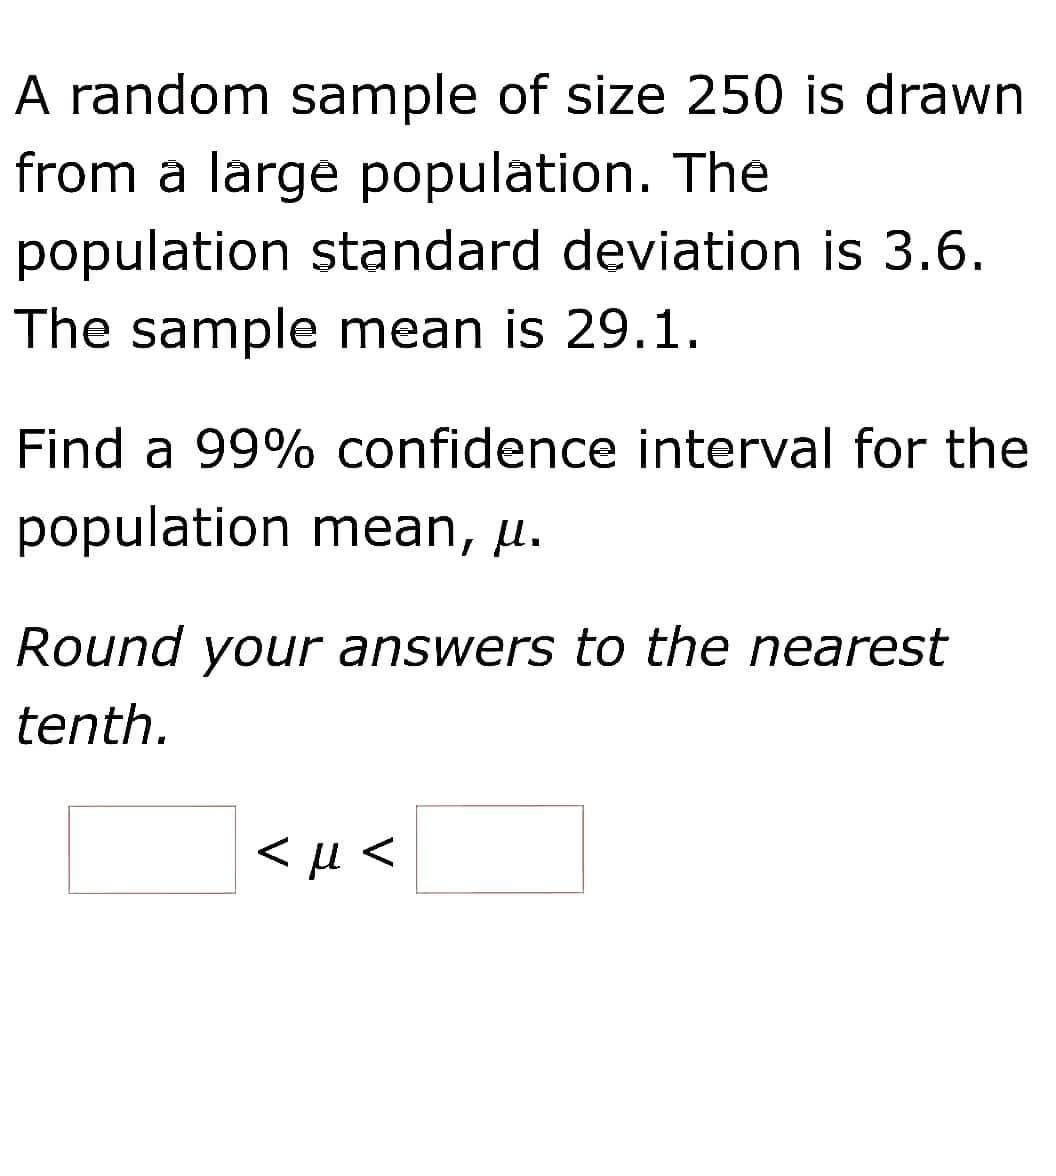 A random sample of size 250 is drawn
from a large population. The
population standard deviation is 3.6.
The sample mean is 29.1.
Find a 99% confidence interval for the
population mean, µ.
Round your answers to the nearest
tenth.
< µ <
